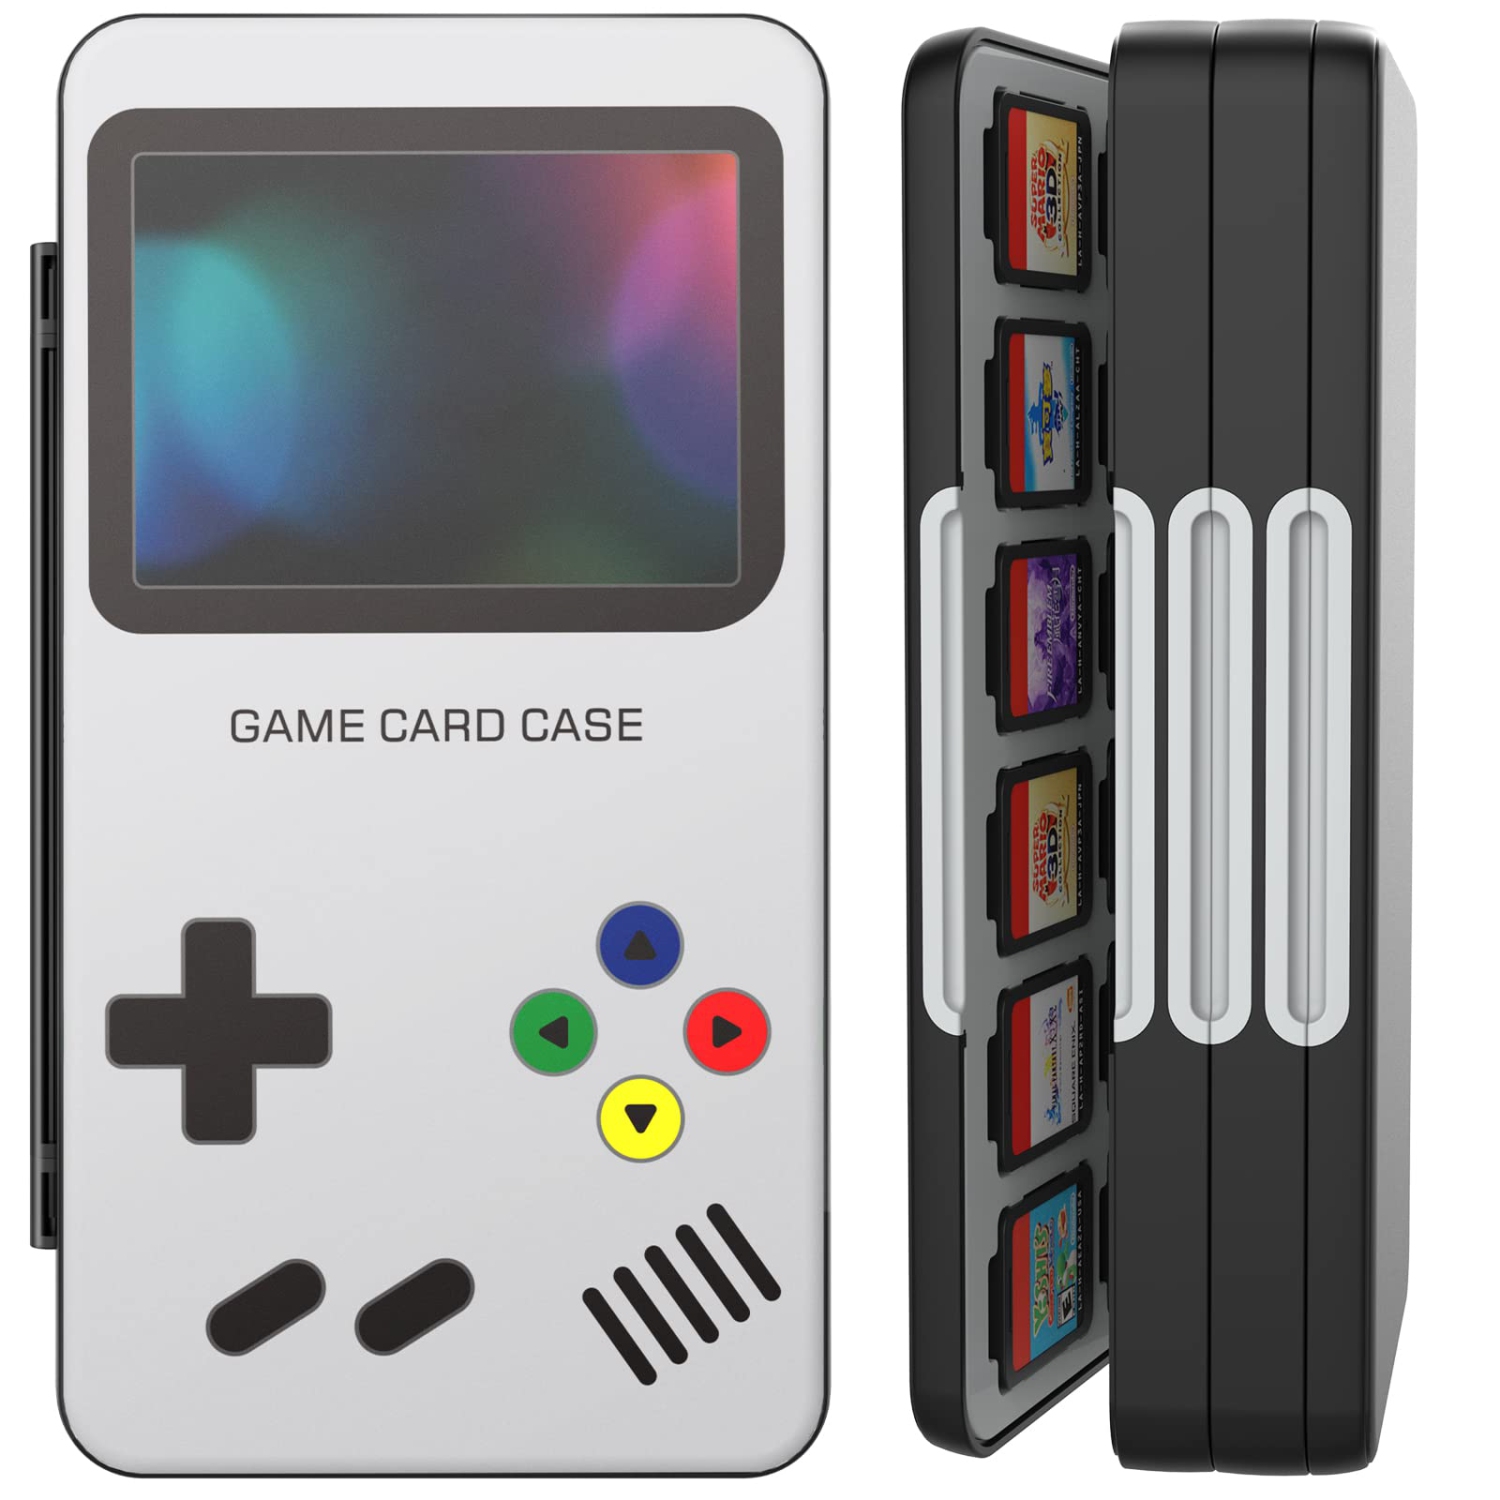 Game Card Case for Nintendo Switch and Switch OLED,Customized Pattern Nintendo Switch Lite Game Card Storage Case with 72 Game Card Slots and 24 Micro SD Card Slots.